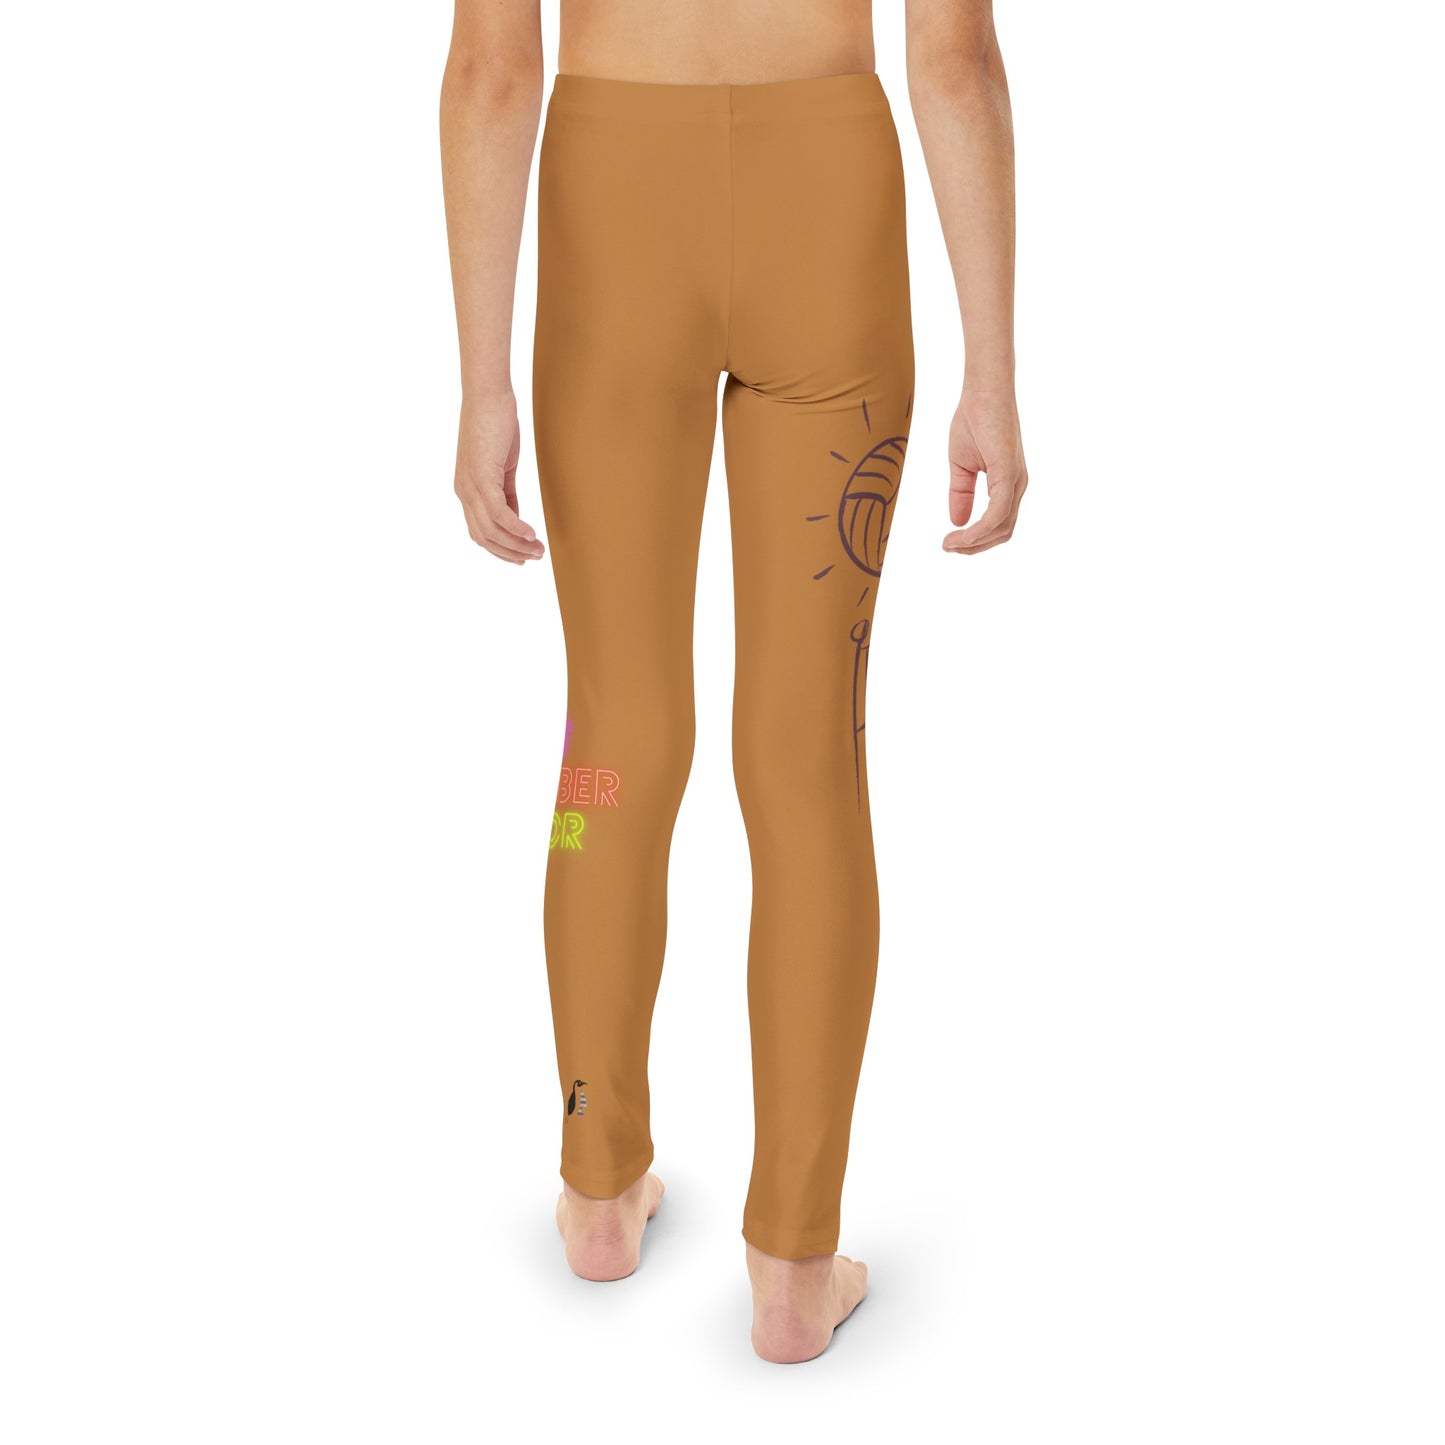 Youth Full-Length Leggings: Volleyball Lite Brown